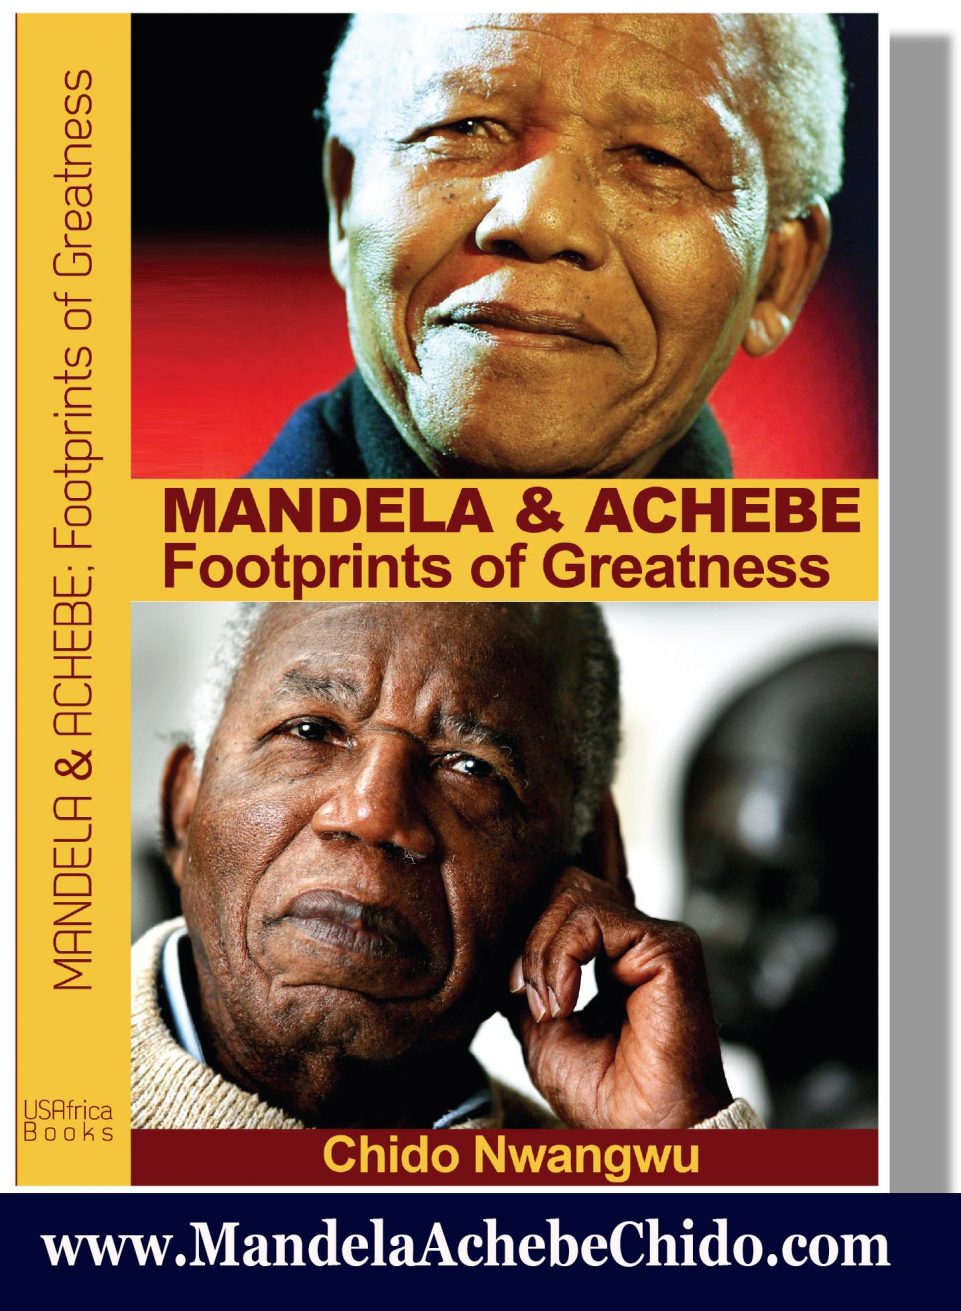 Mandela_Achebe_book-by-Chido_2013_cover-Lrs